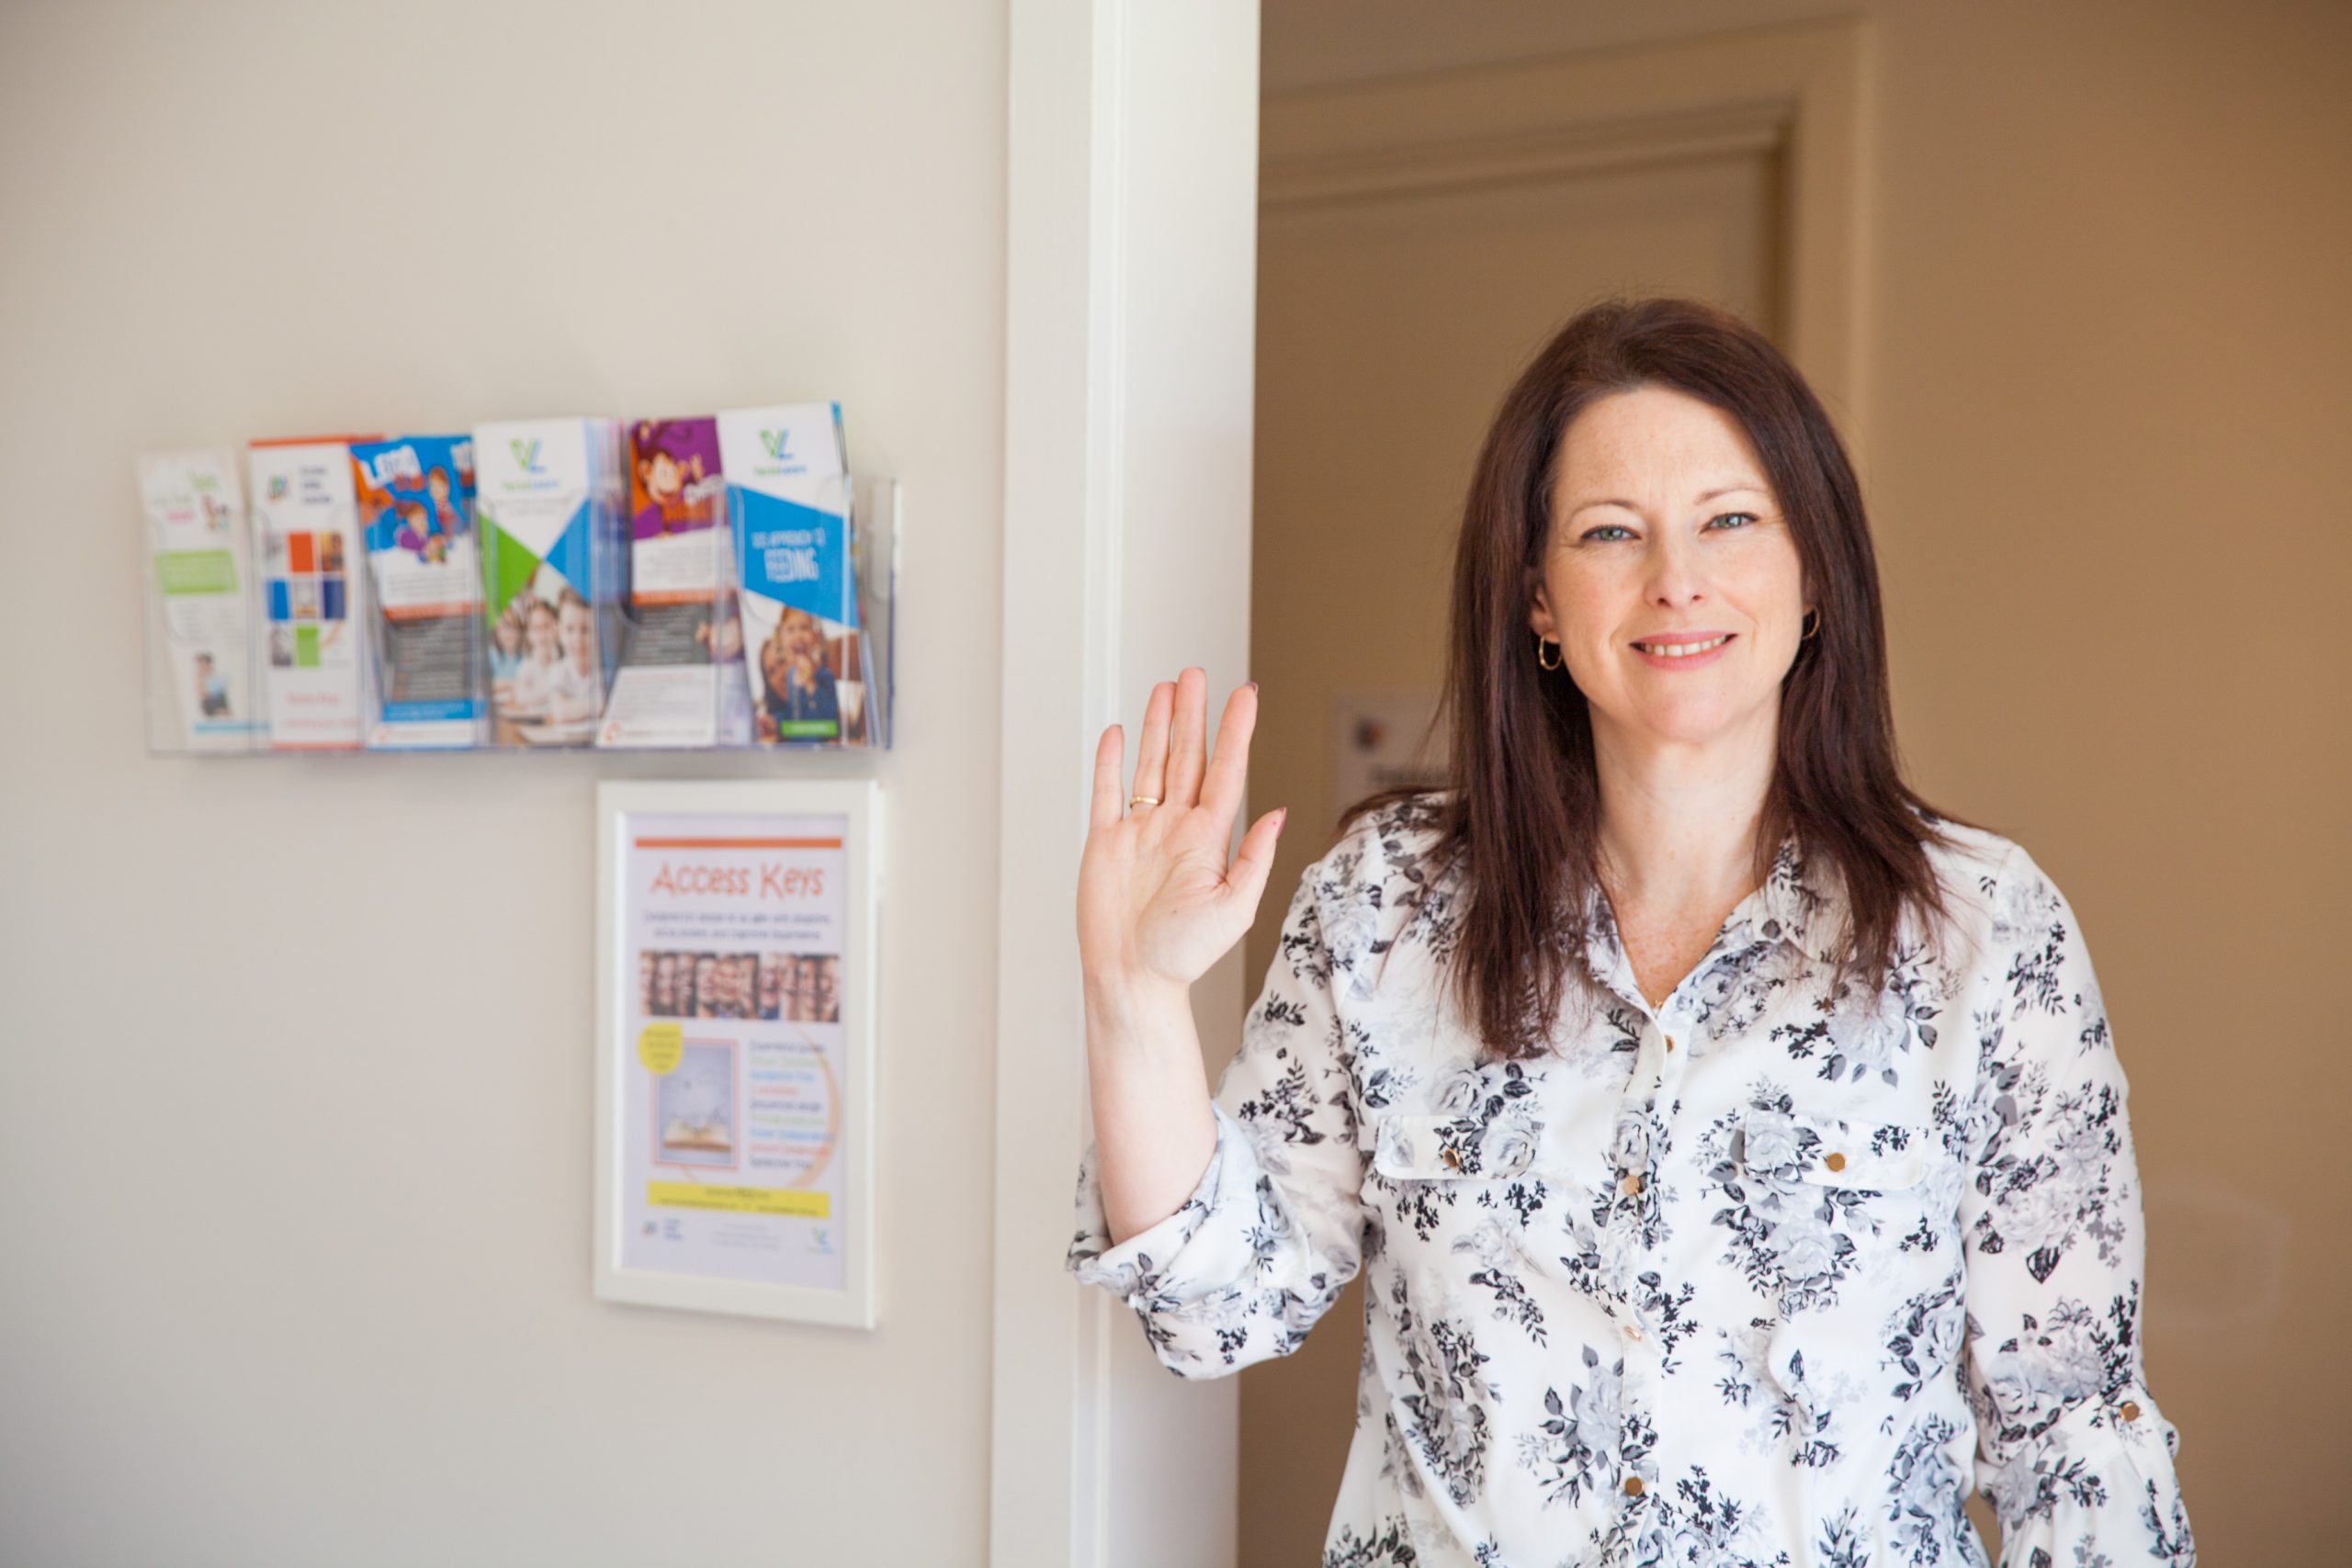 Female speech pathologist standing in speech pathology clinic waving. Background with Access Key signage and brochures